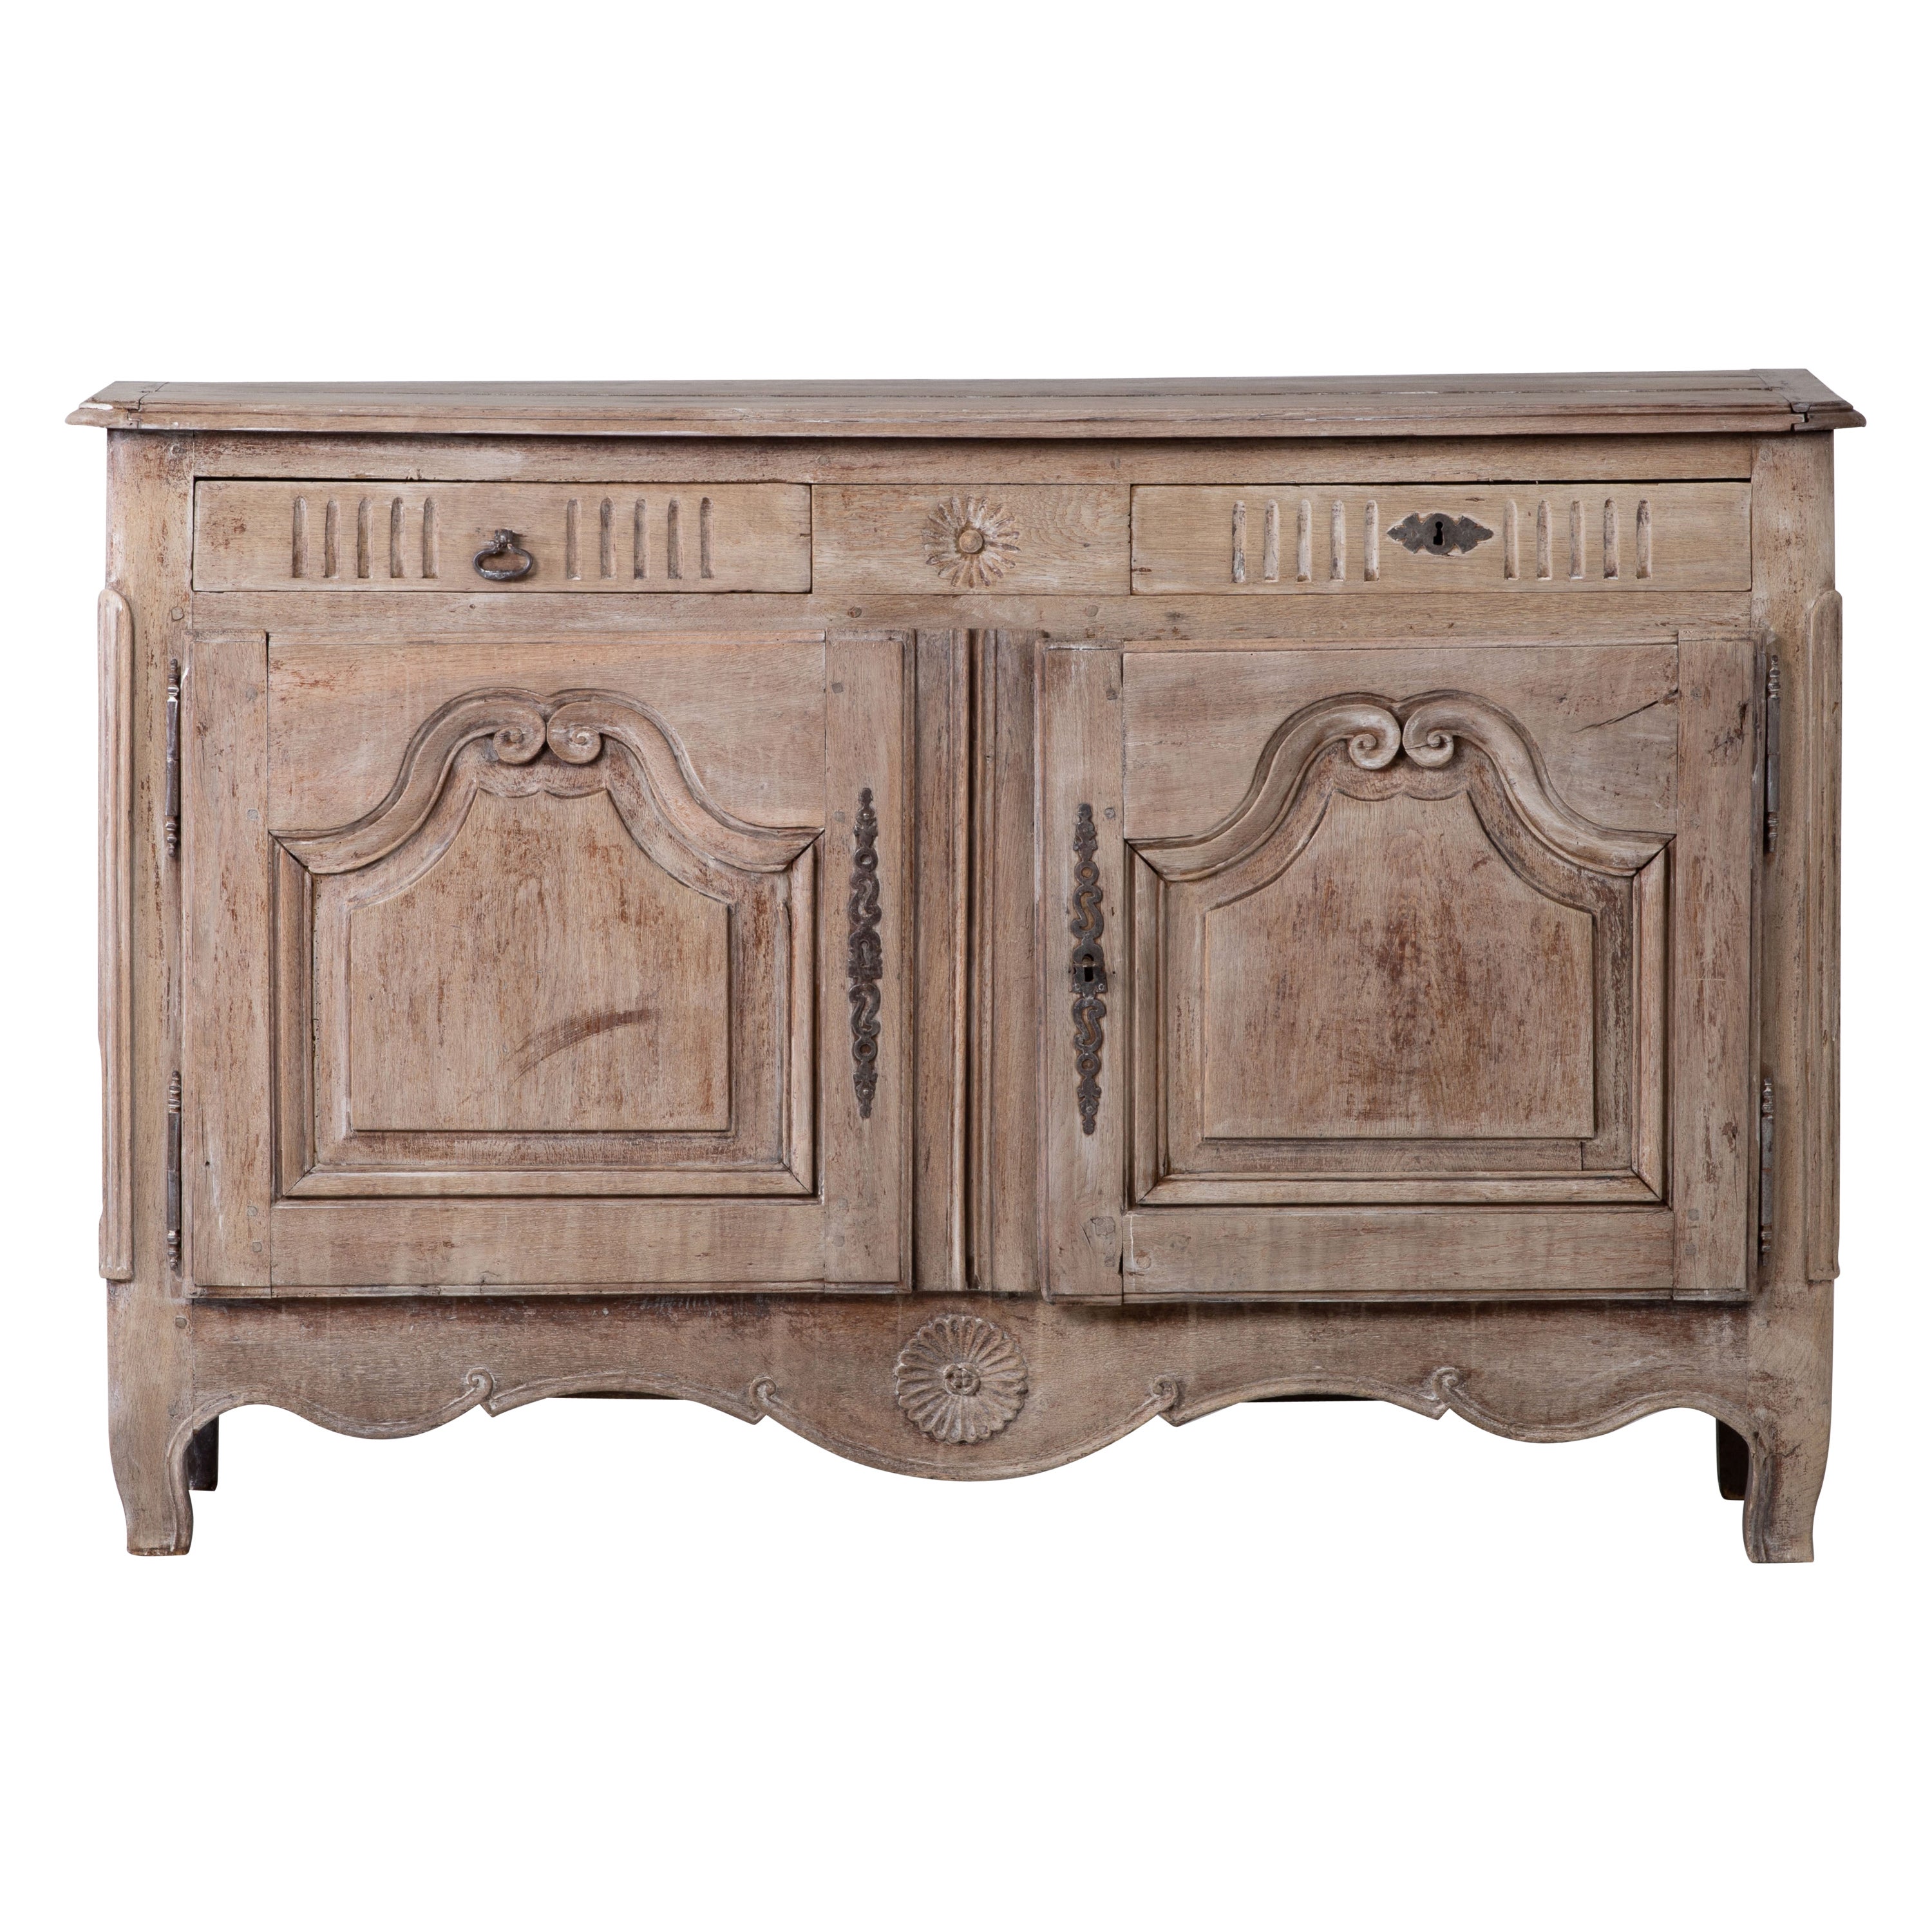 19th Century French Provencal Bleached Oak Buffet Cabinet For Sale